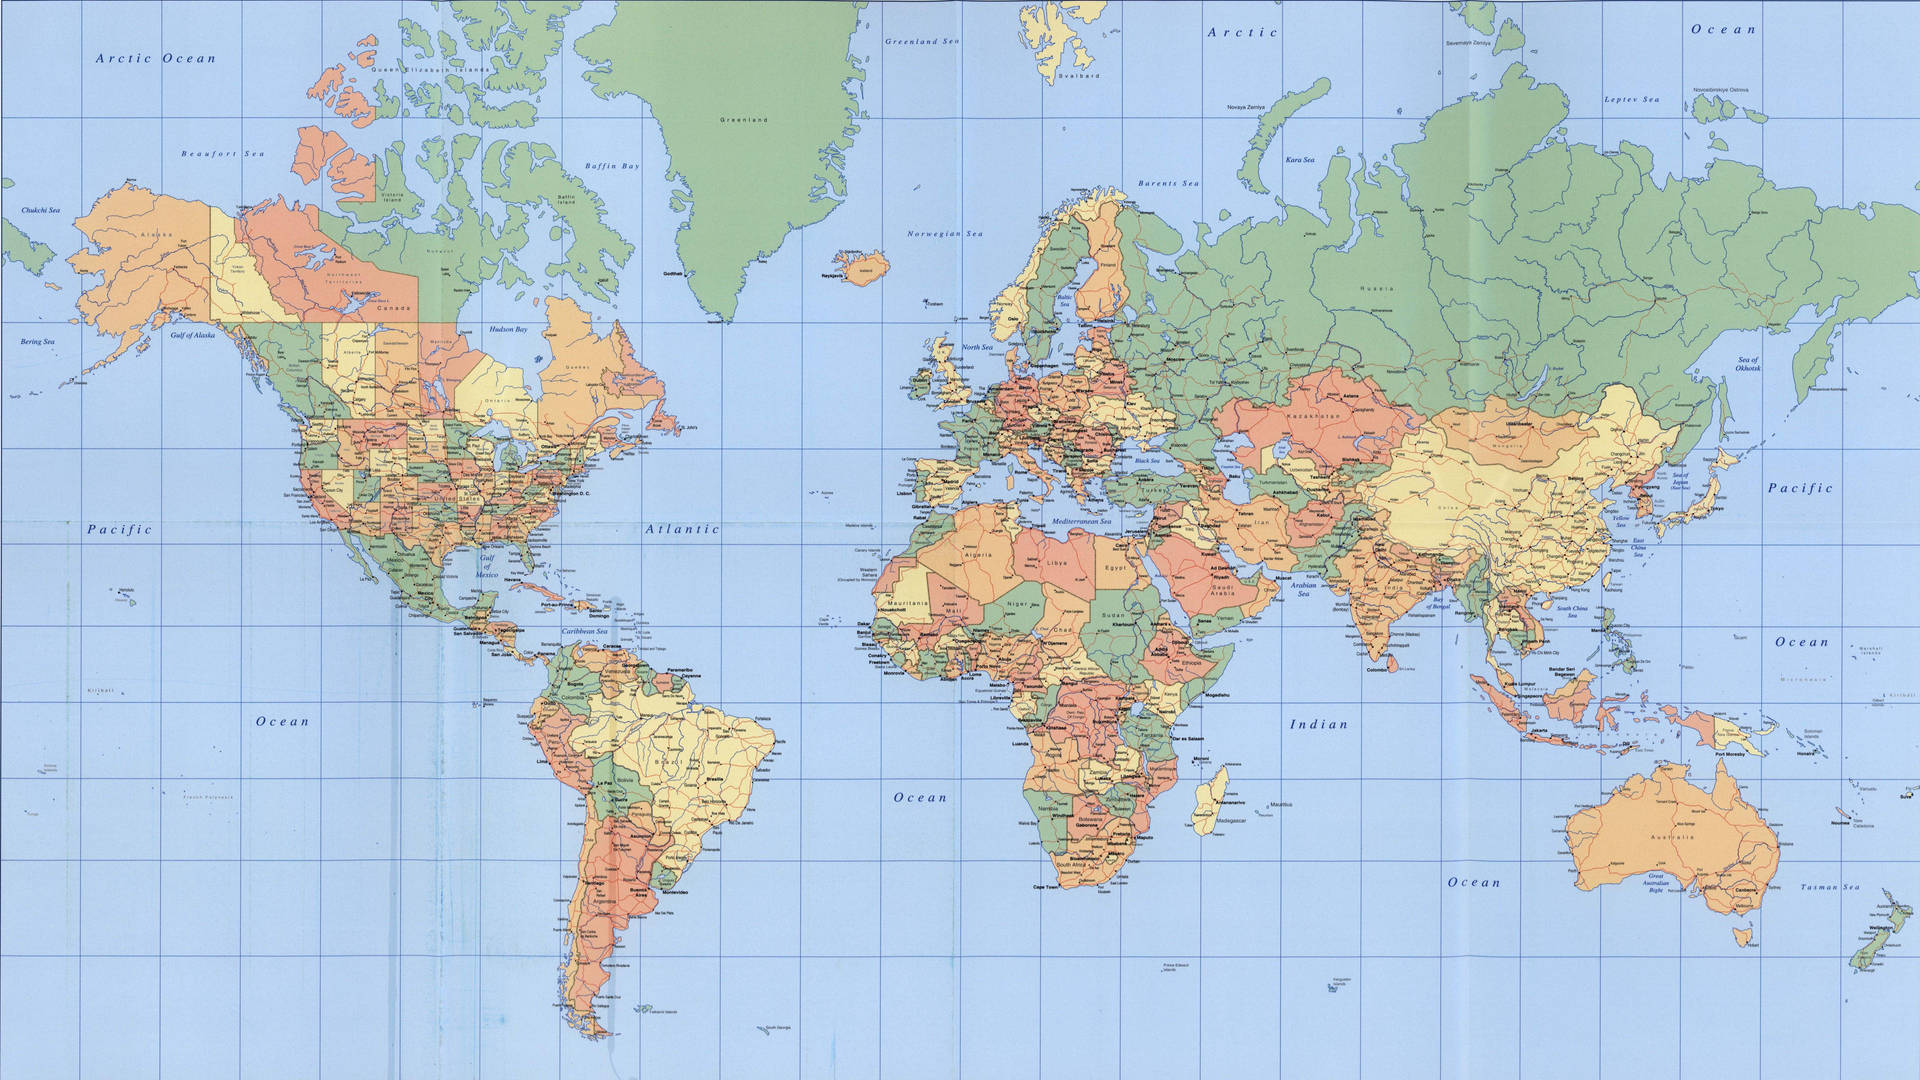 Free World Map Wallpaper Downloads, [300+] World Map Wallpapers for FREE |  